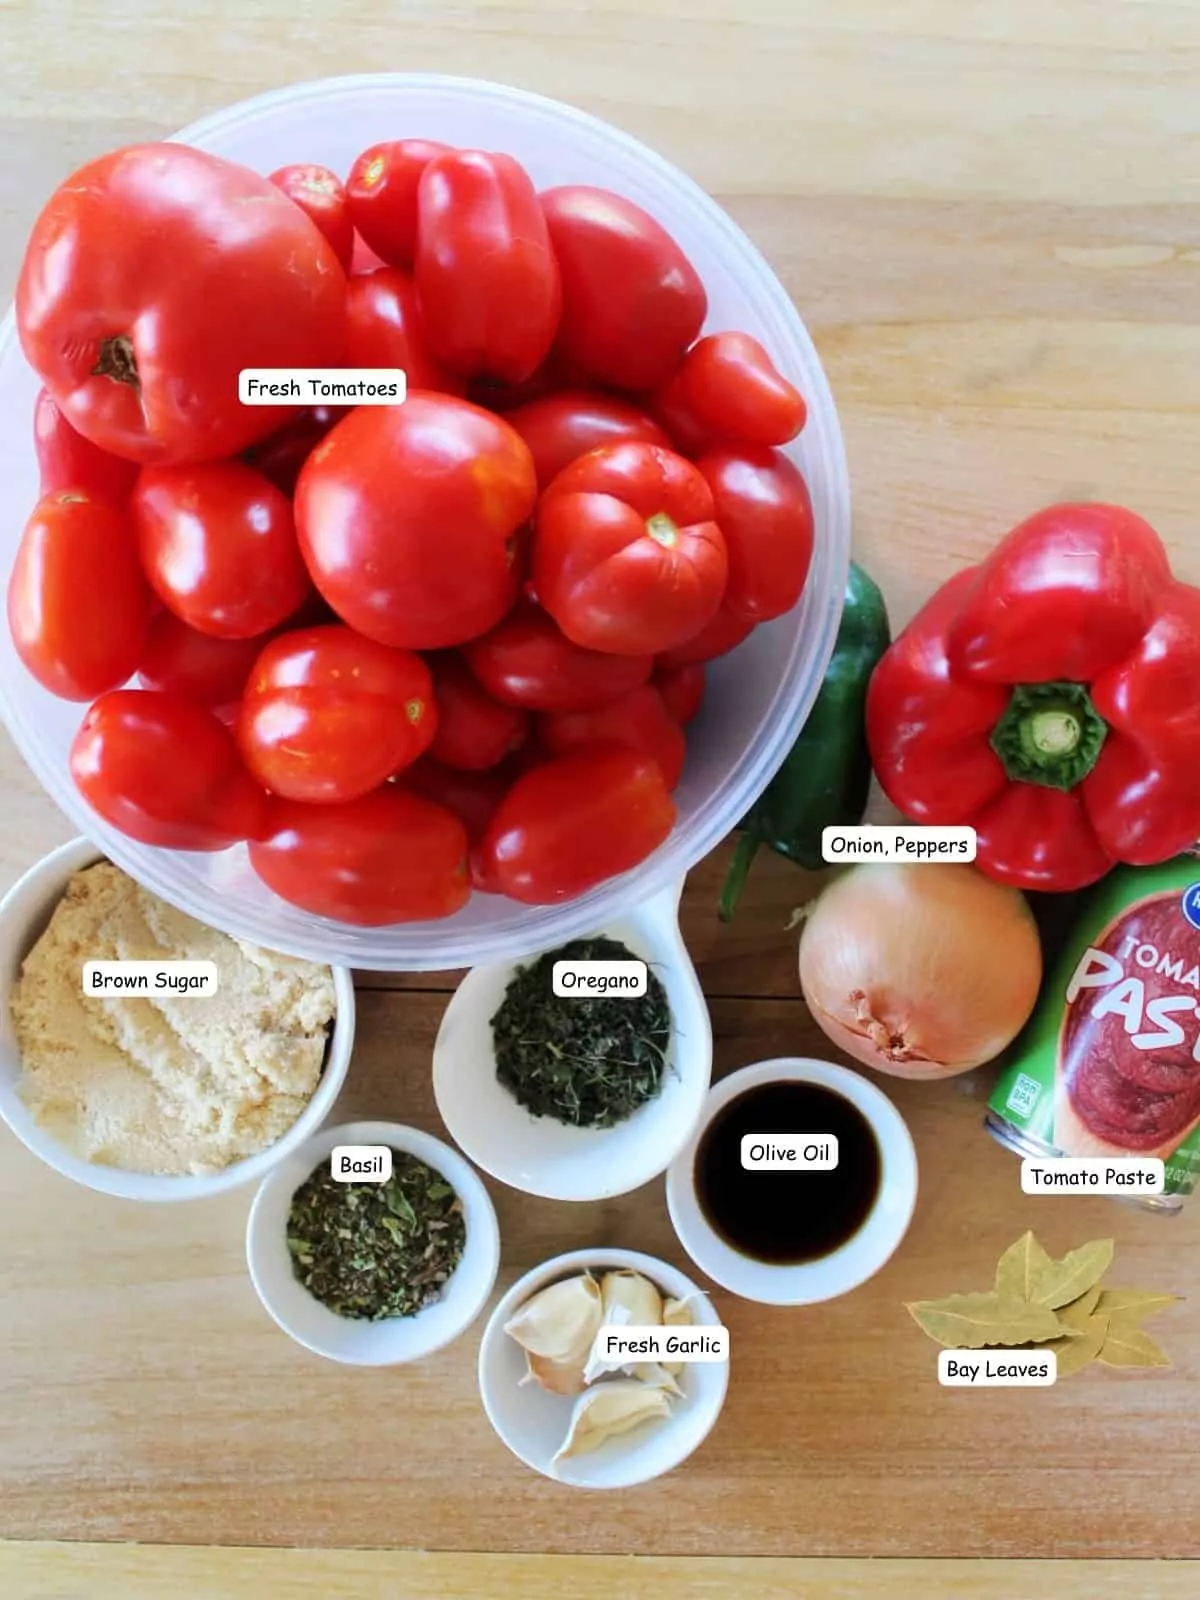 Ingredients for homemade sauce.